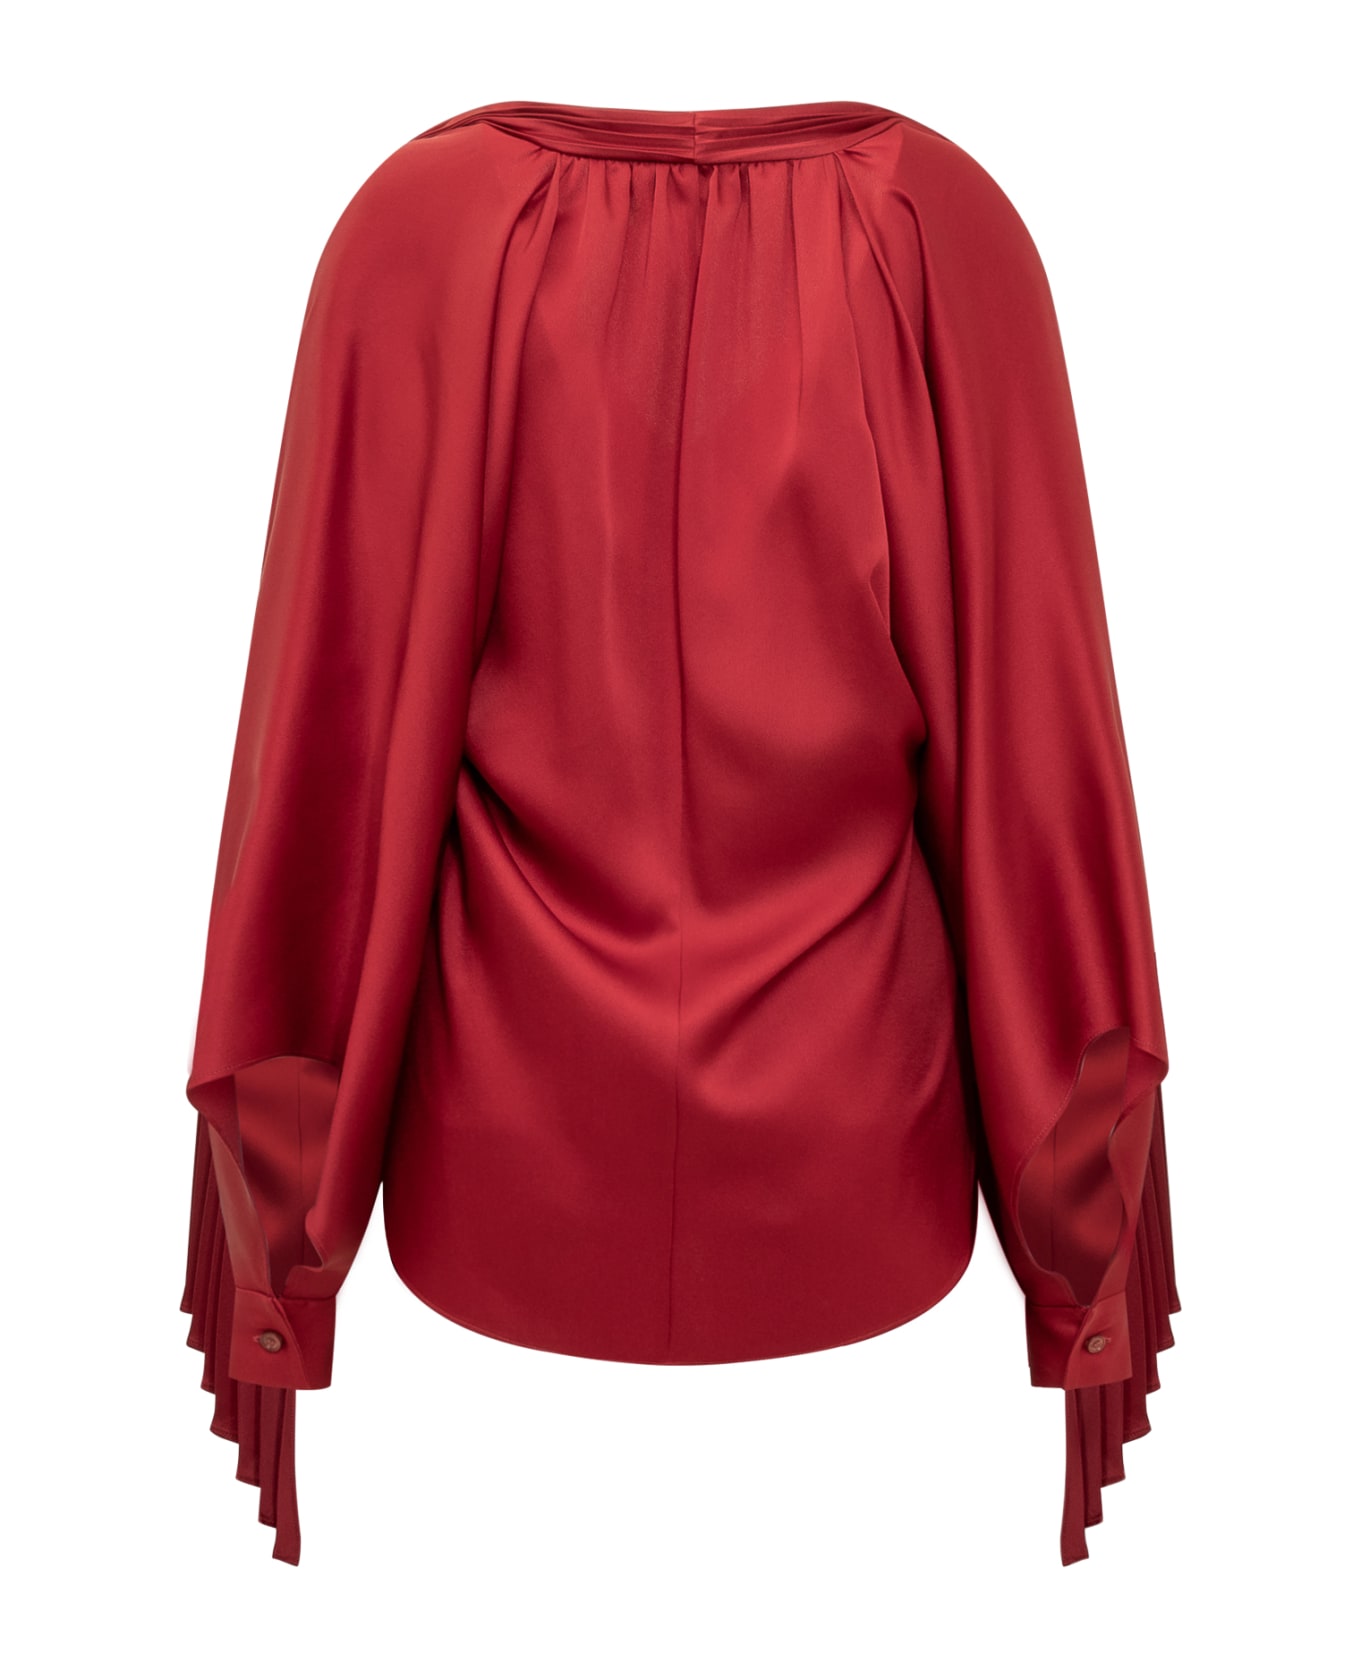 Del Core Draped Top With Scarf - BLOOD RED